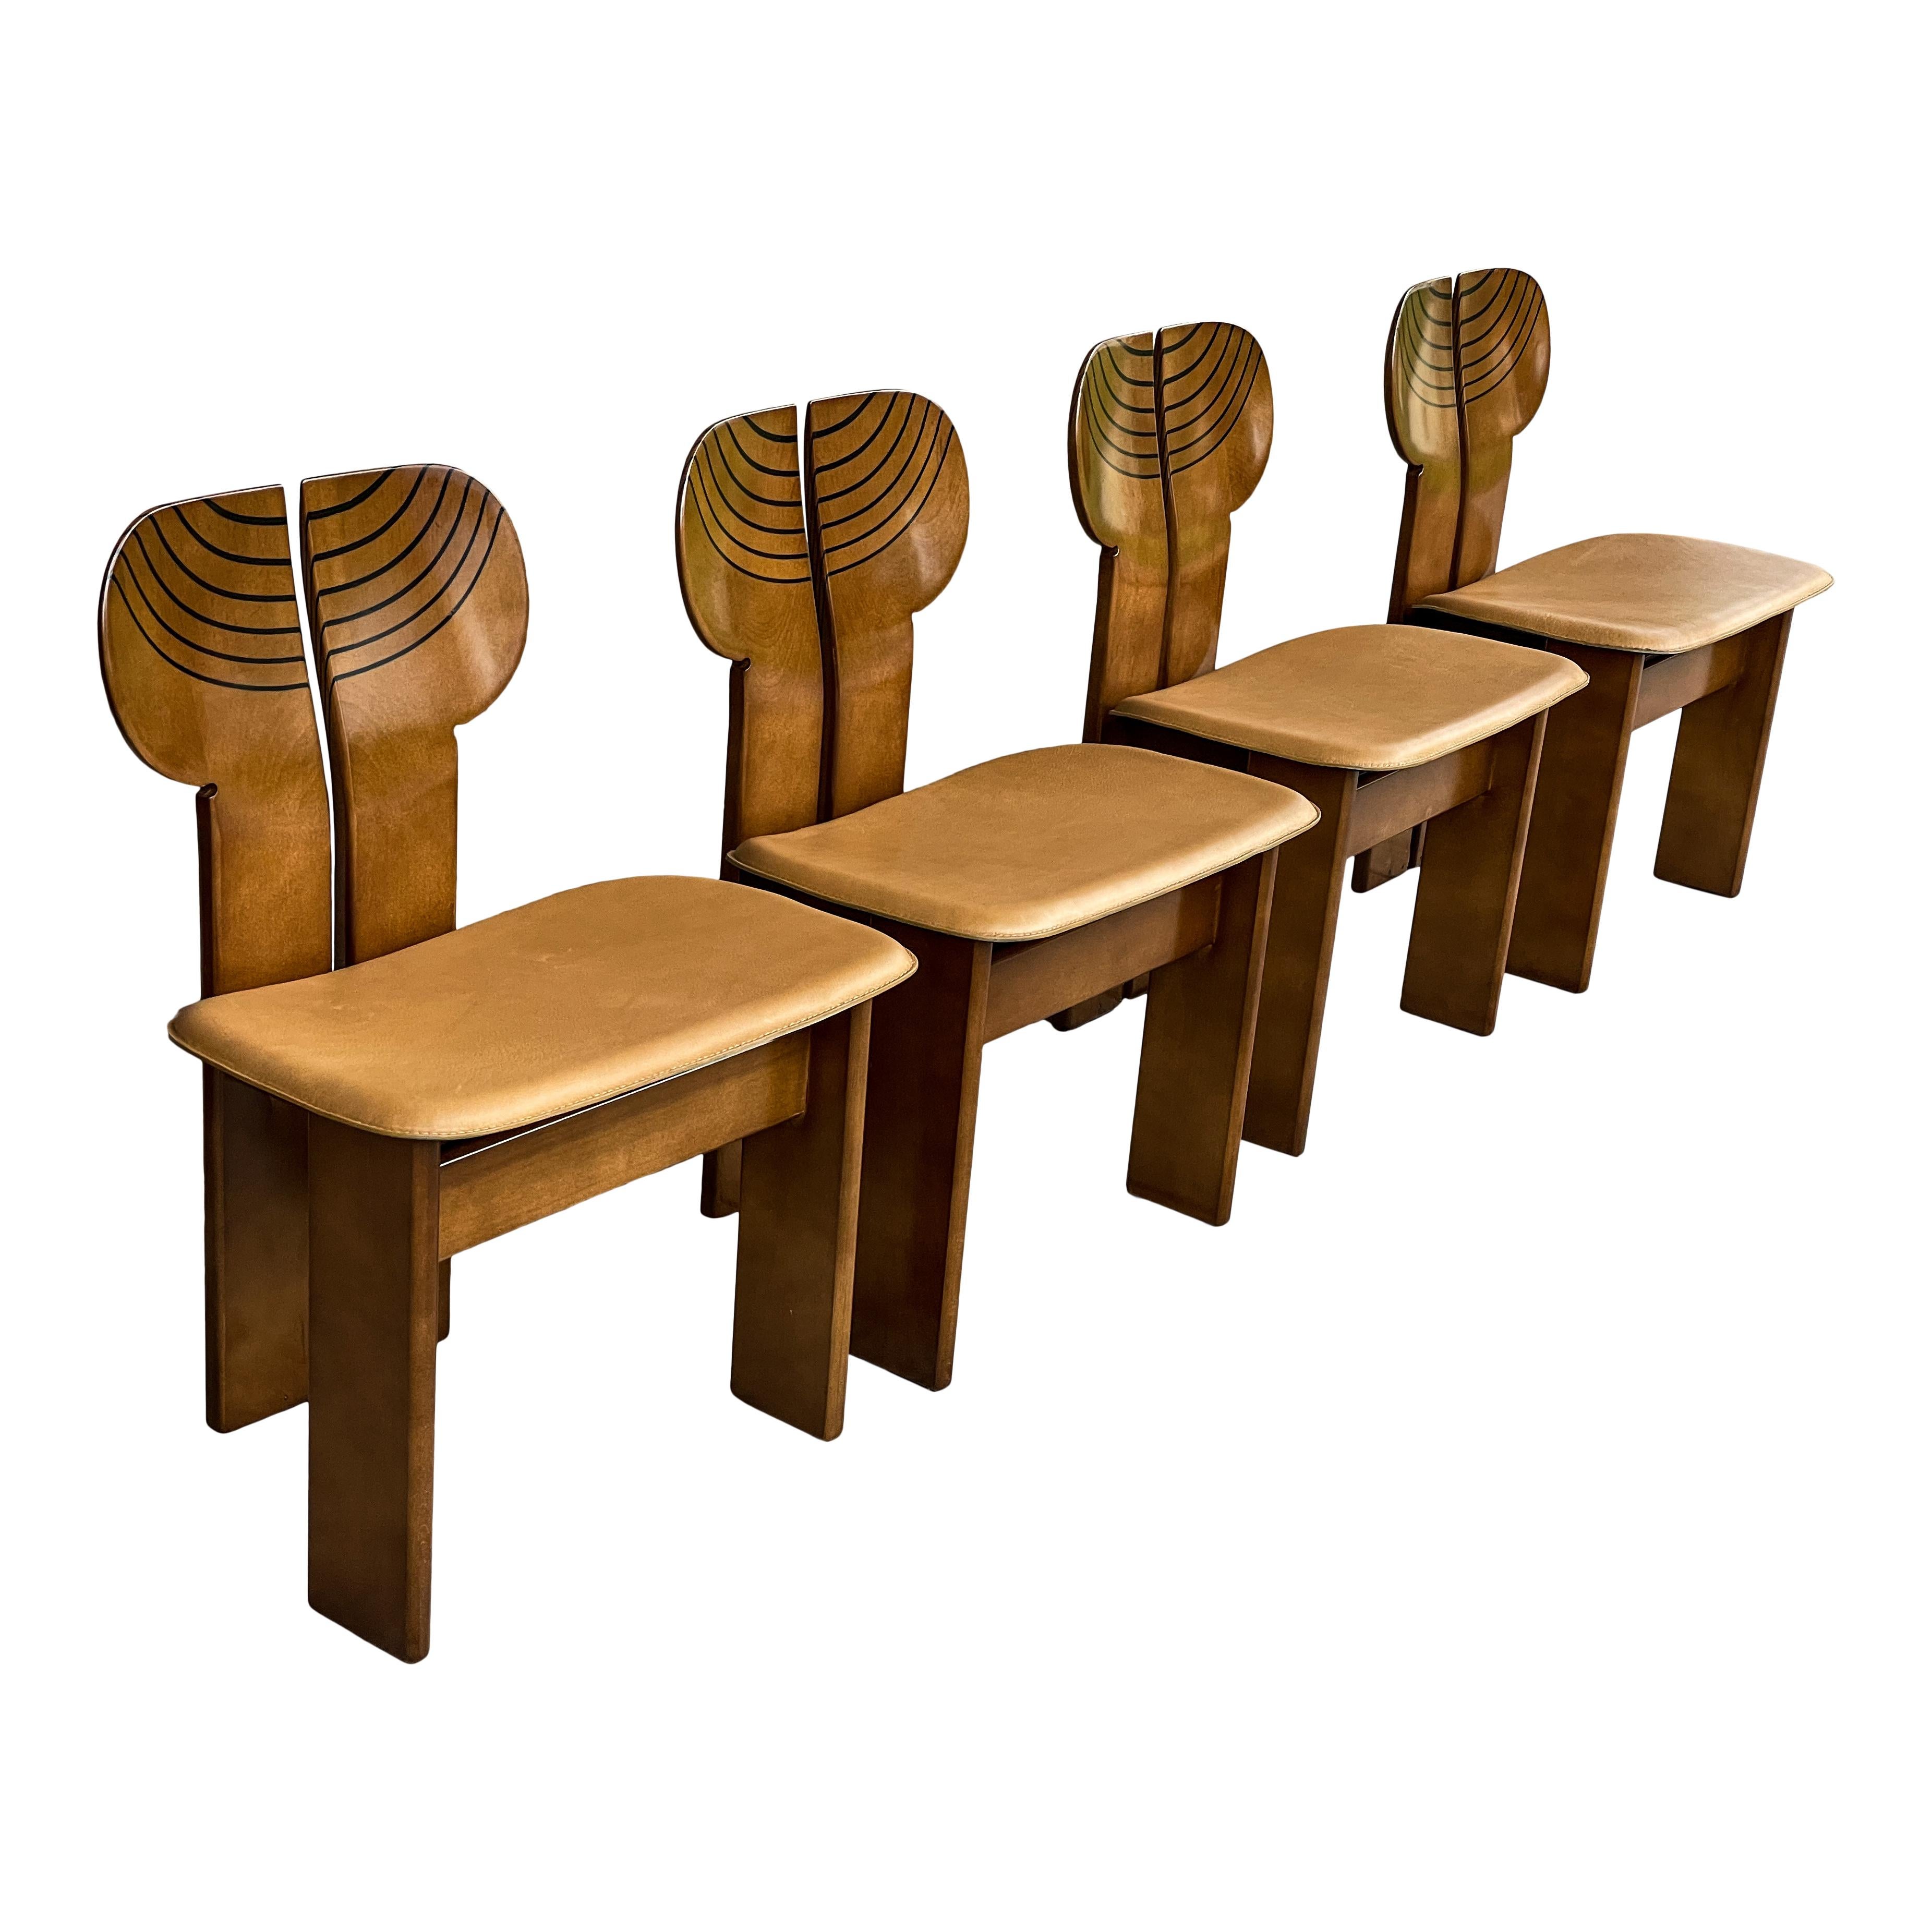 Set of four Africa dining chairs, designed by Afra and Tobia Scarpa and produced by the Italian manufacturer Maxalto in 1976.
They feature a clear walnut briar structure and a cognac leather seat.
Fully restored in Italy.

The main protagonist of